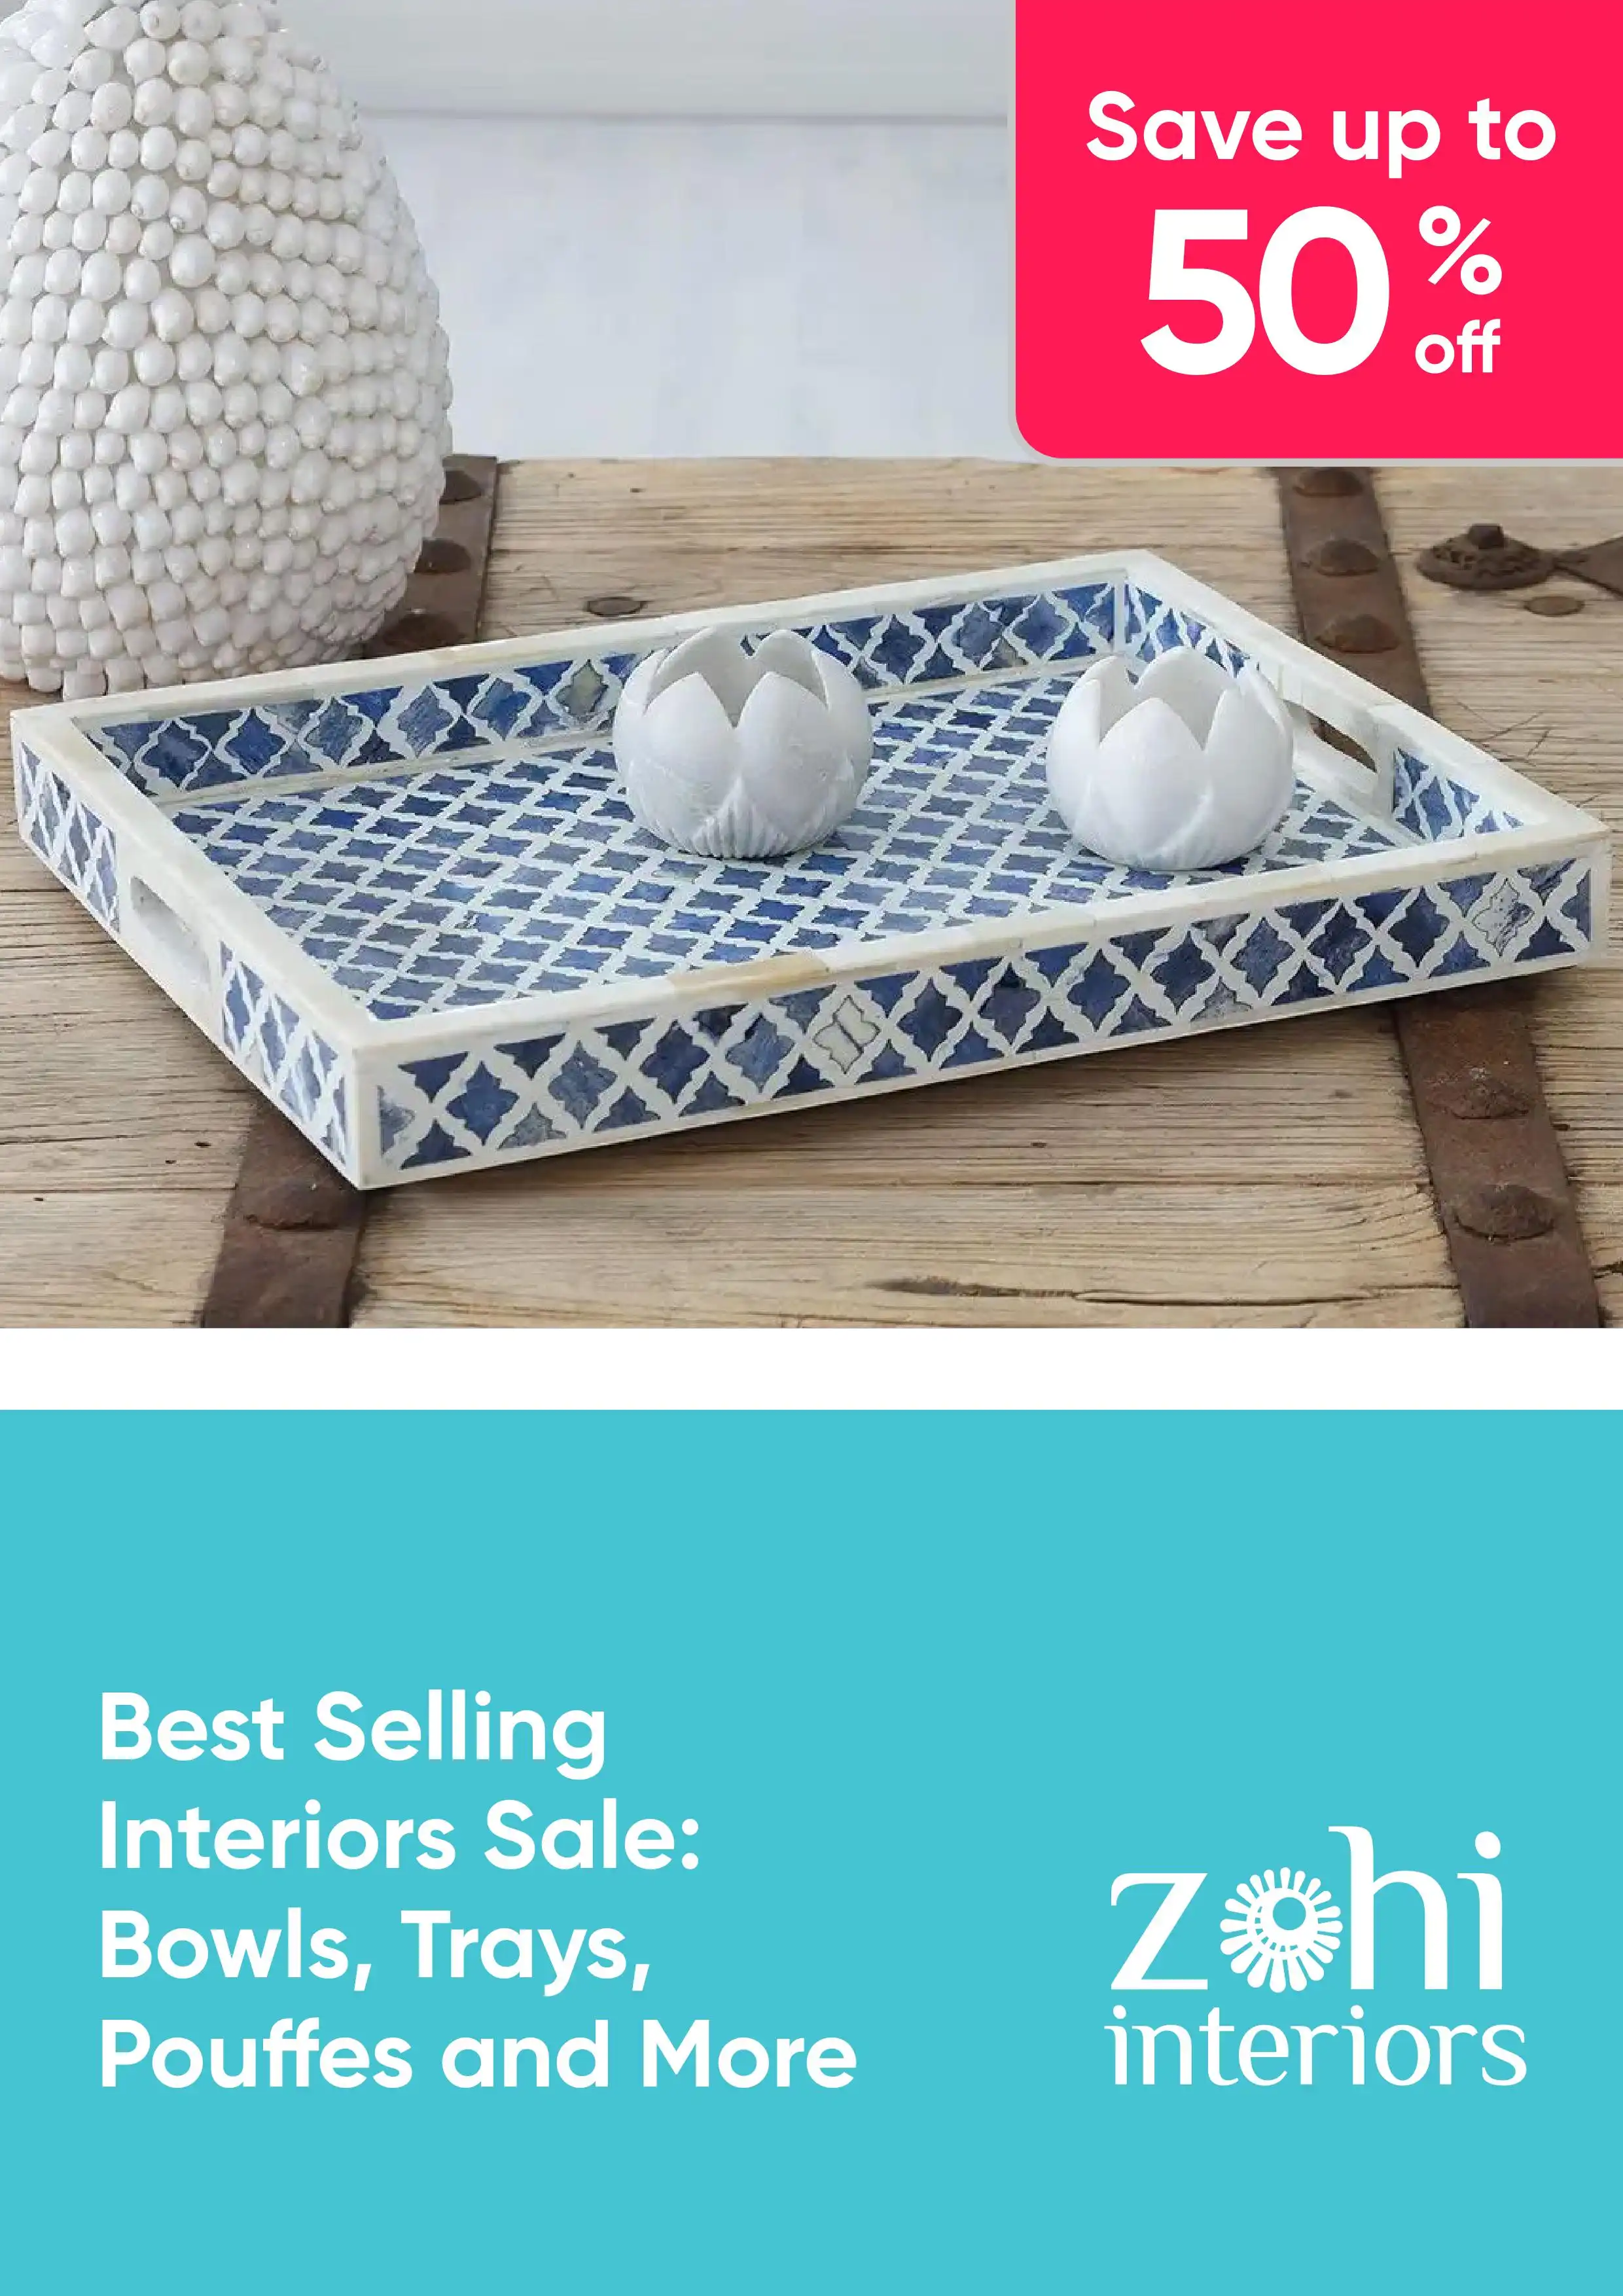 Best Selling Interiors Sale: Bowls, Trays, Pouffes and More – up to 50% off